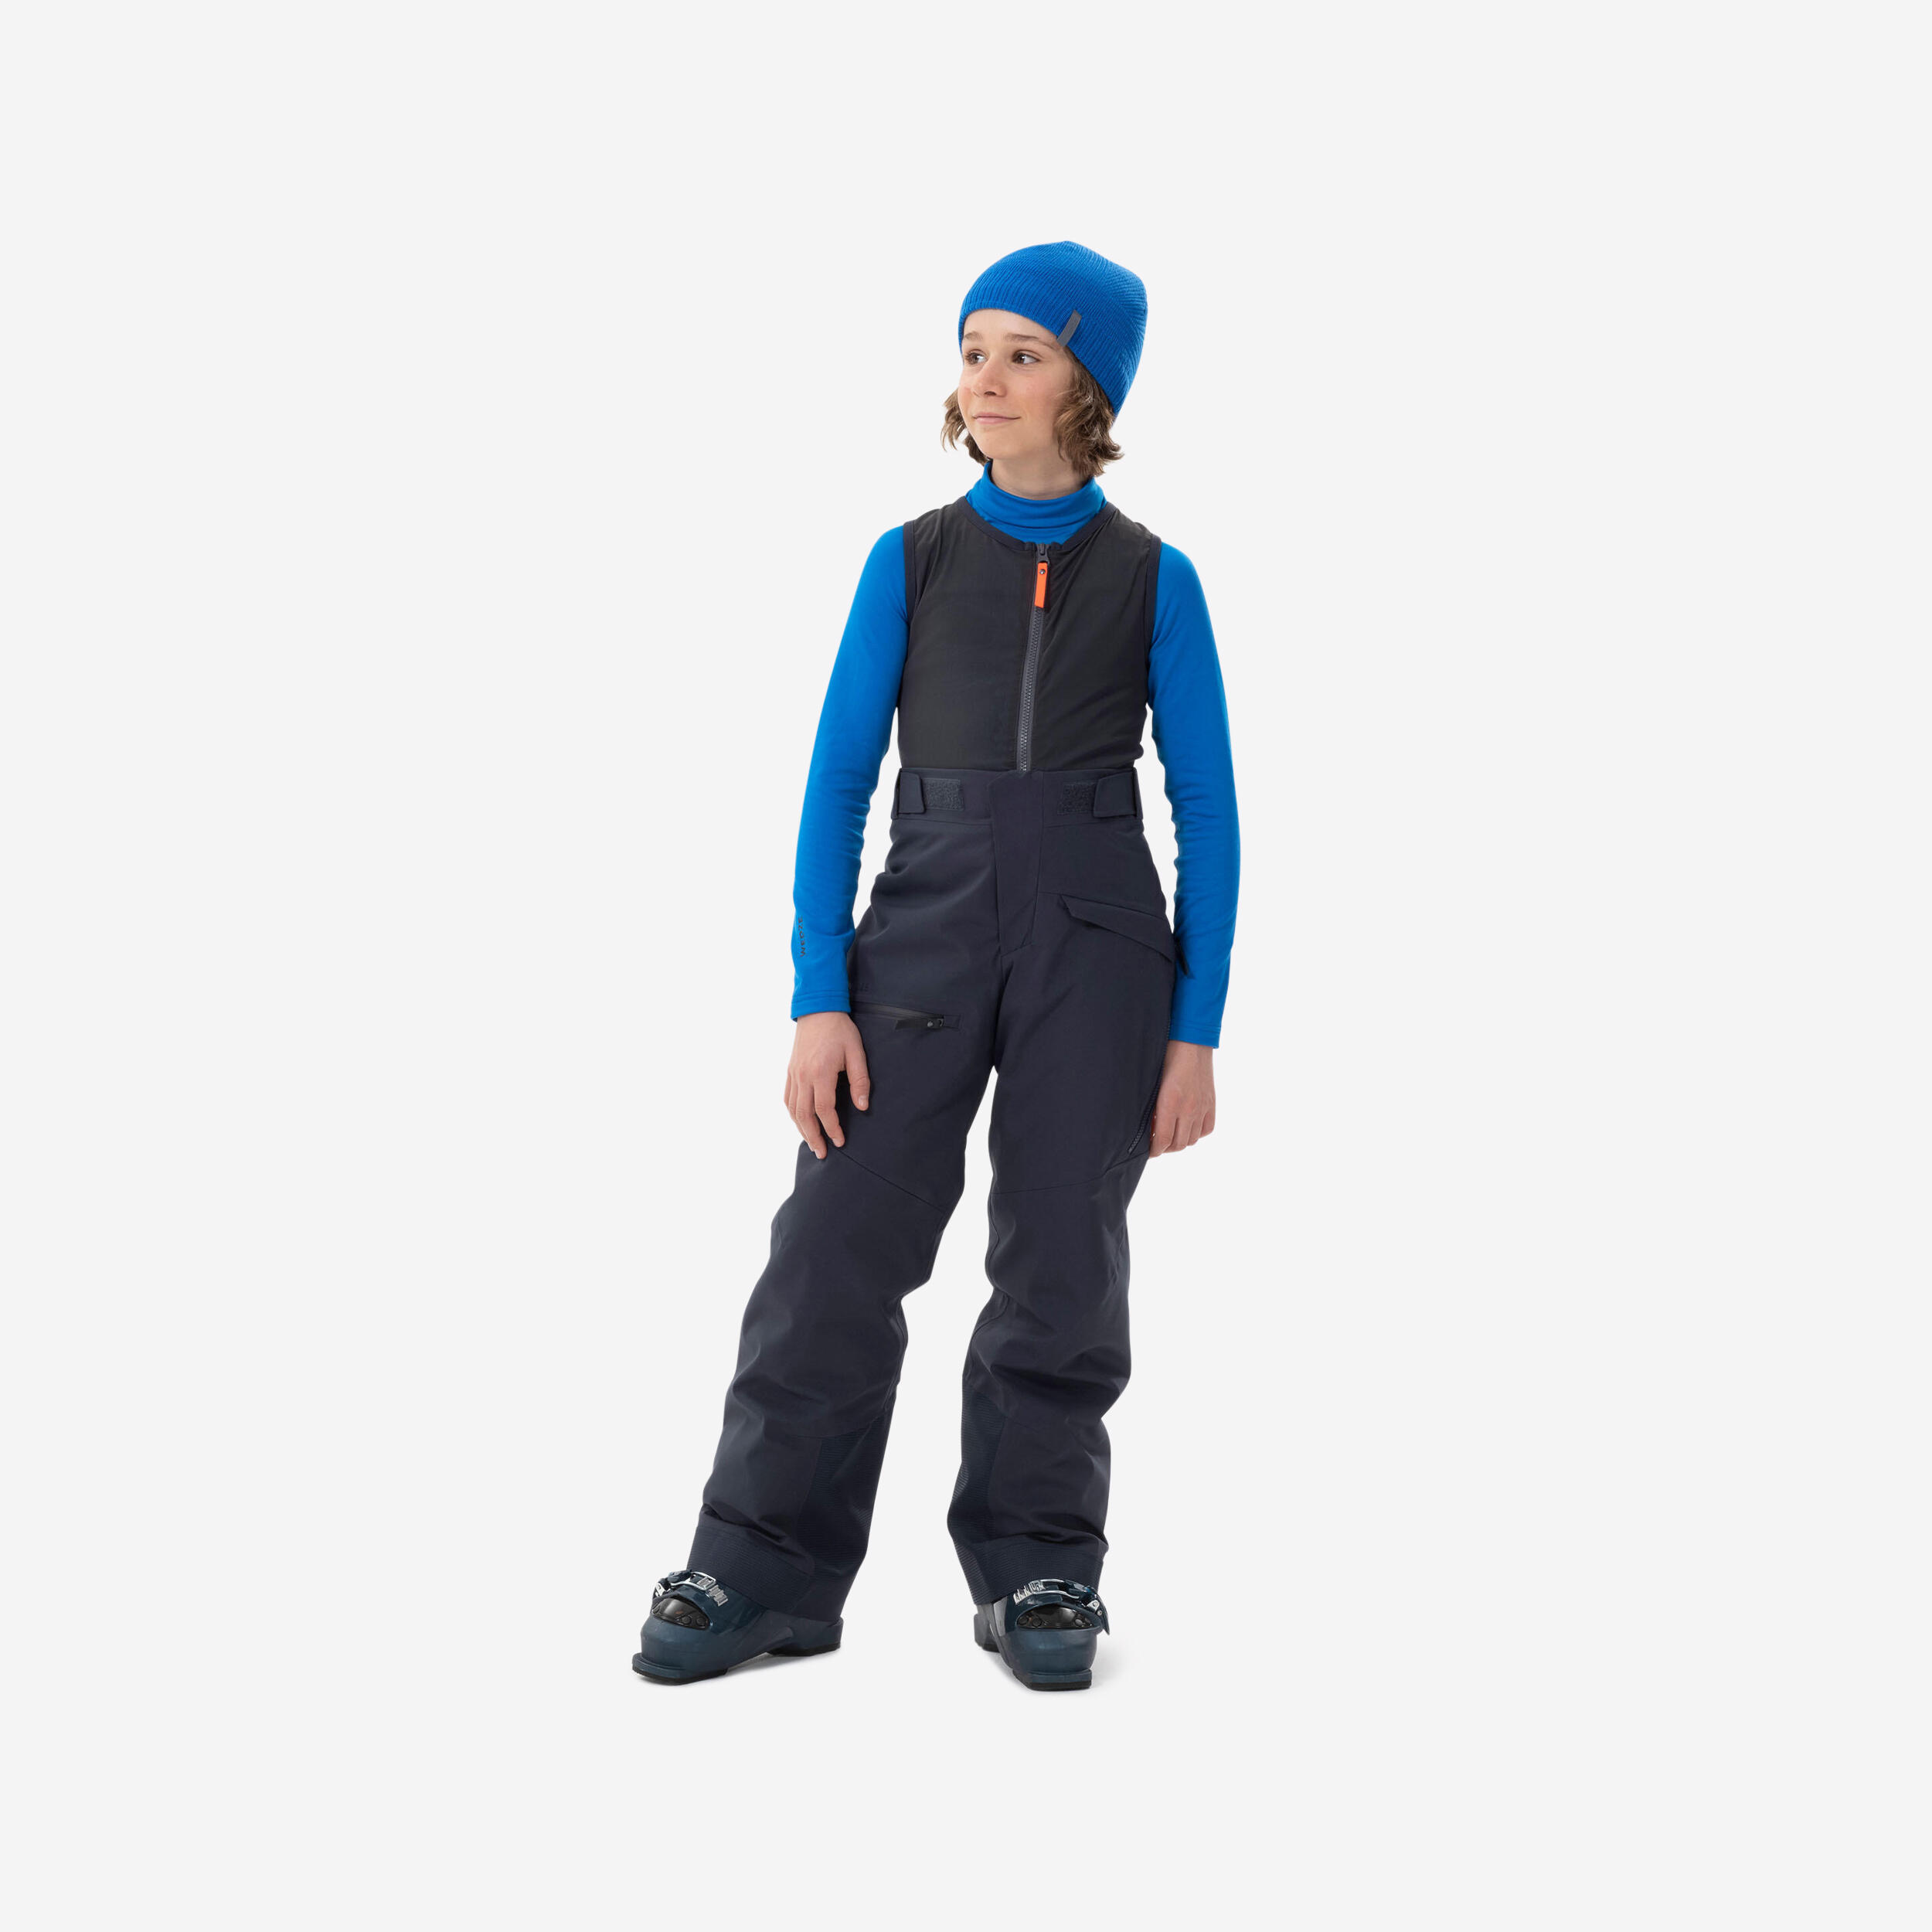 WEDZE KIDS’ SKI TROUSERS WITH BACK PROTECTOR - FR900 - NAVY BLUE